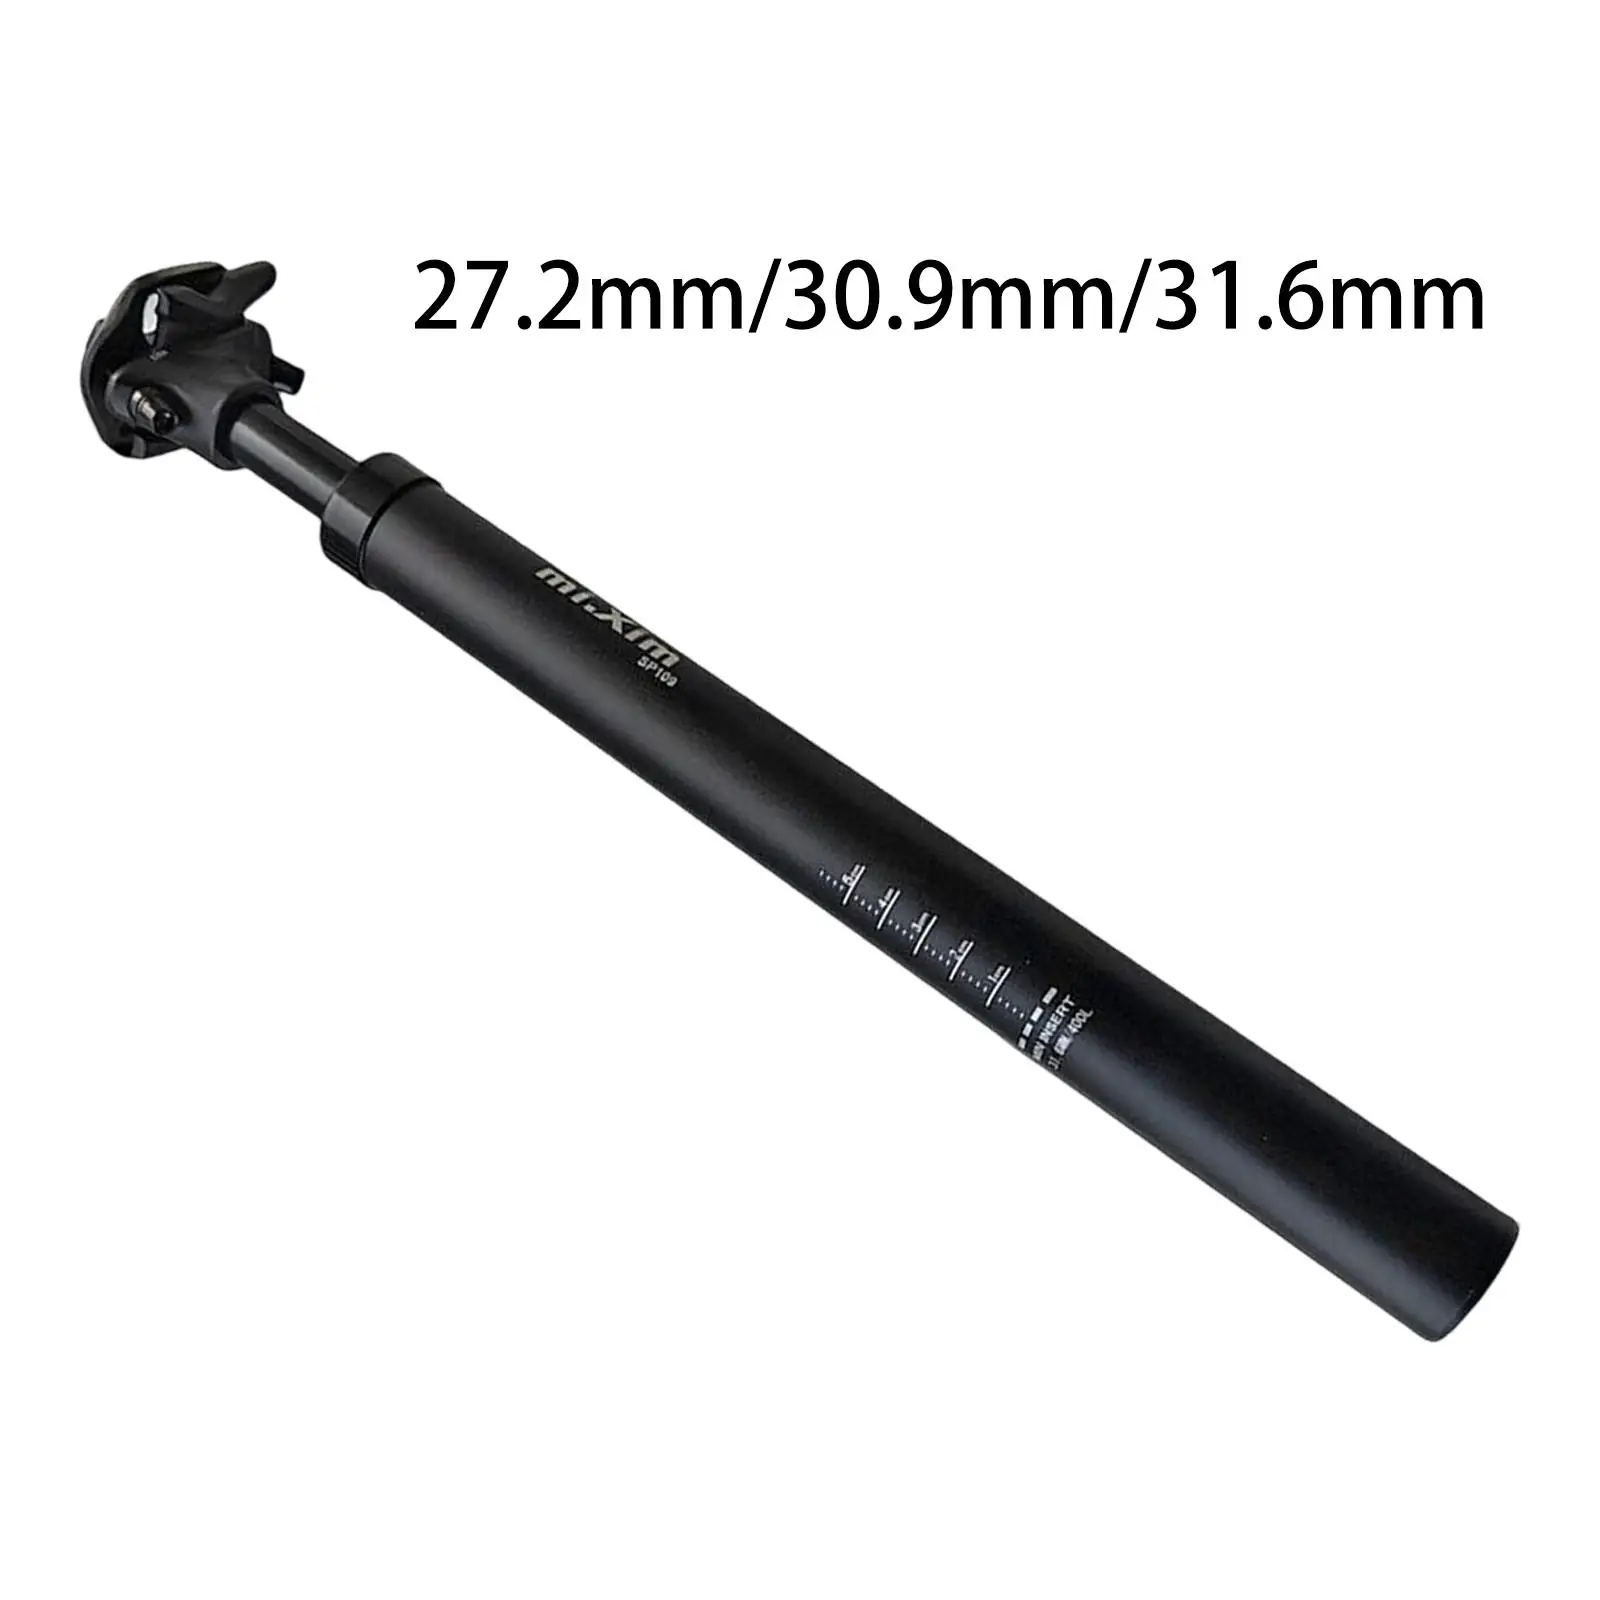 Bike Seatpost Shock Absorber 400mm Seat Post Tube Road Bike BMX Bike Replacement Accessory Parts